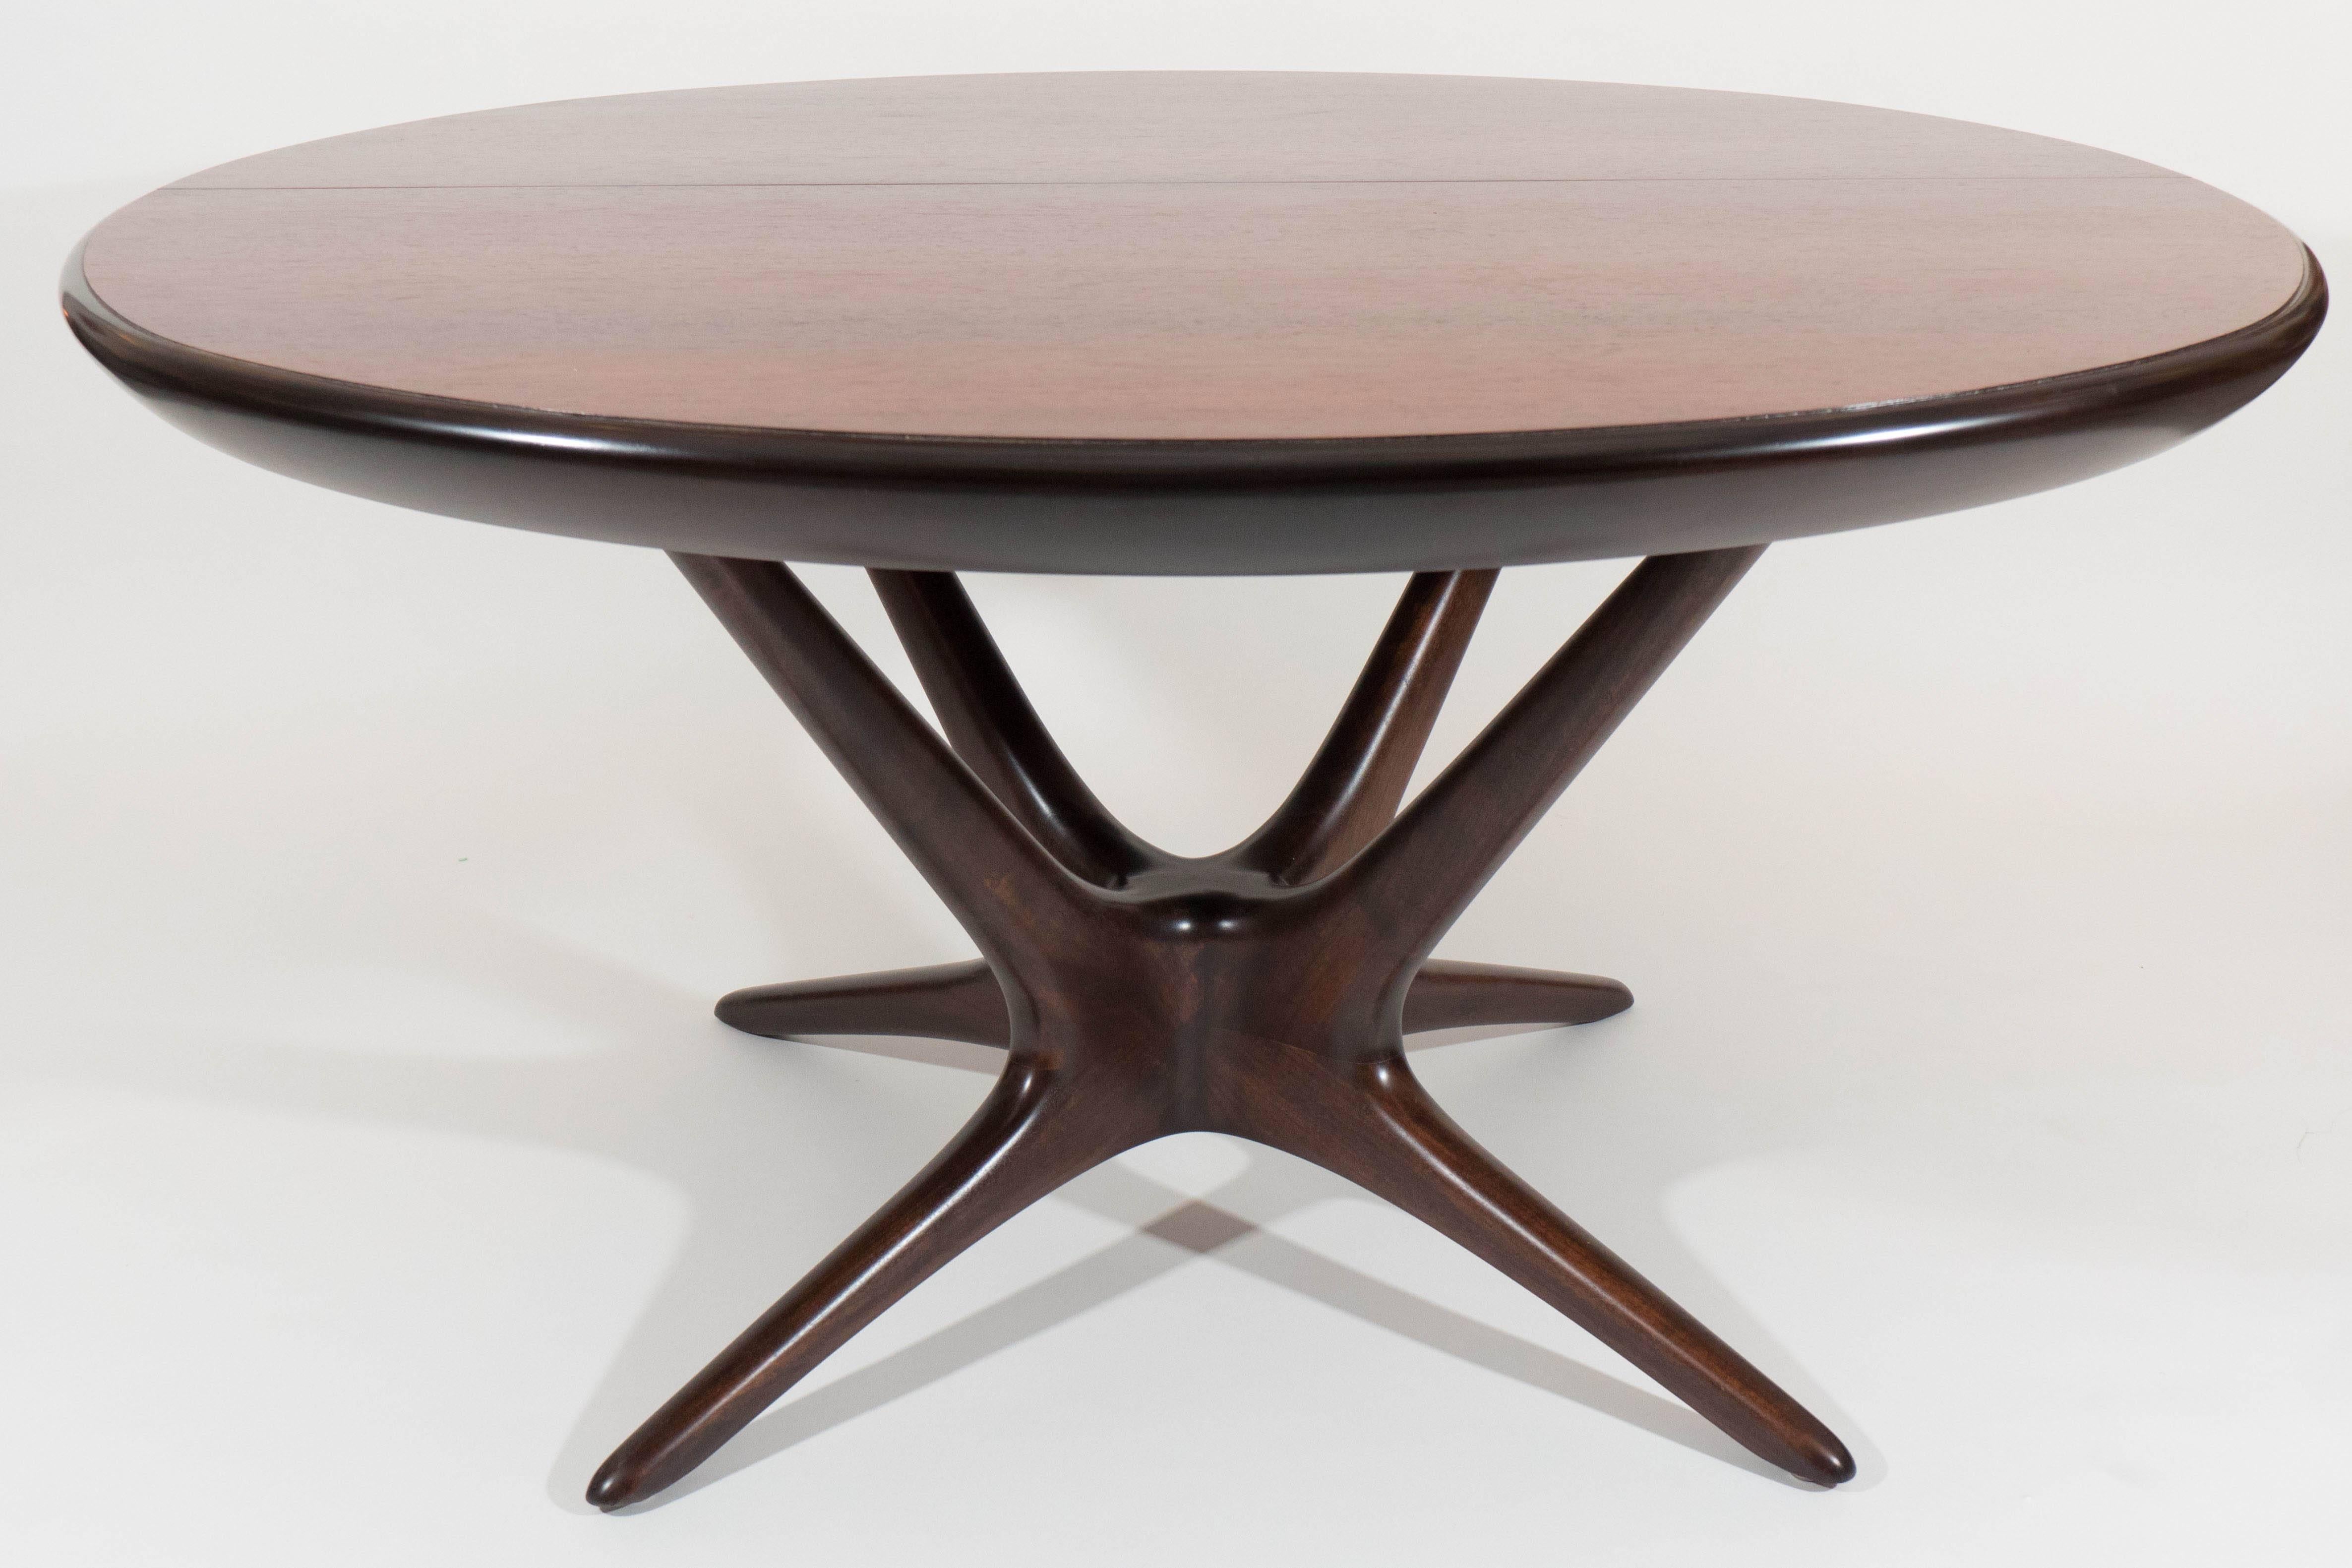 Rosewood Rare and Large Vladimir Kagan Dining Table with Leaves